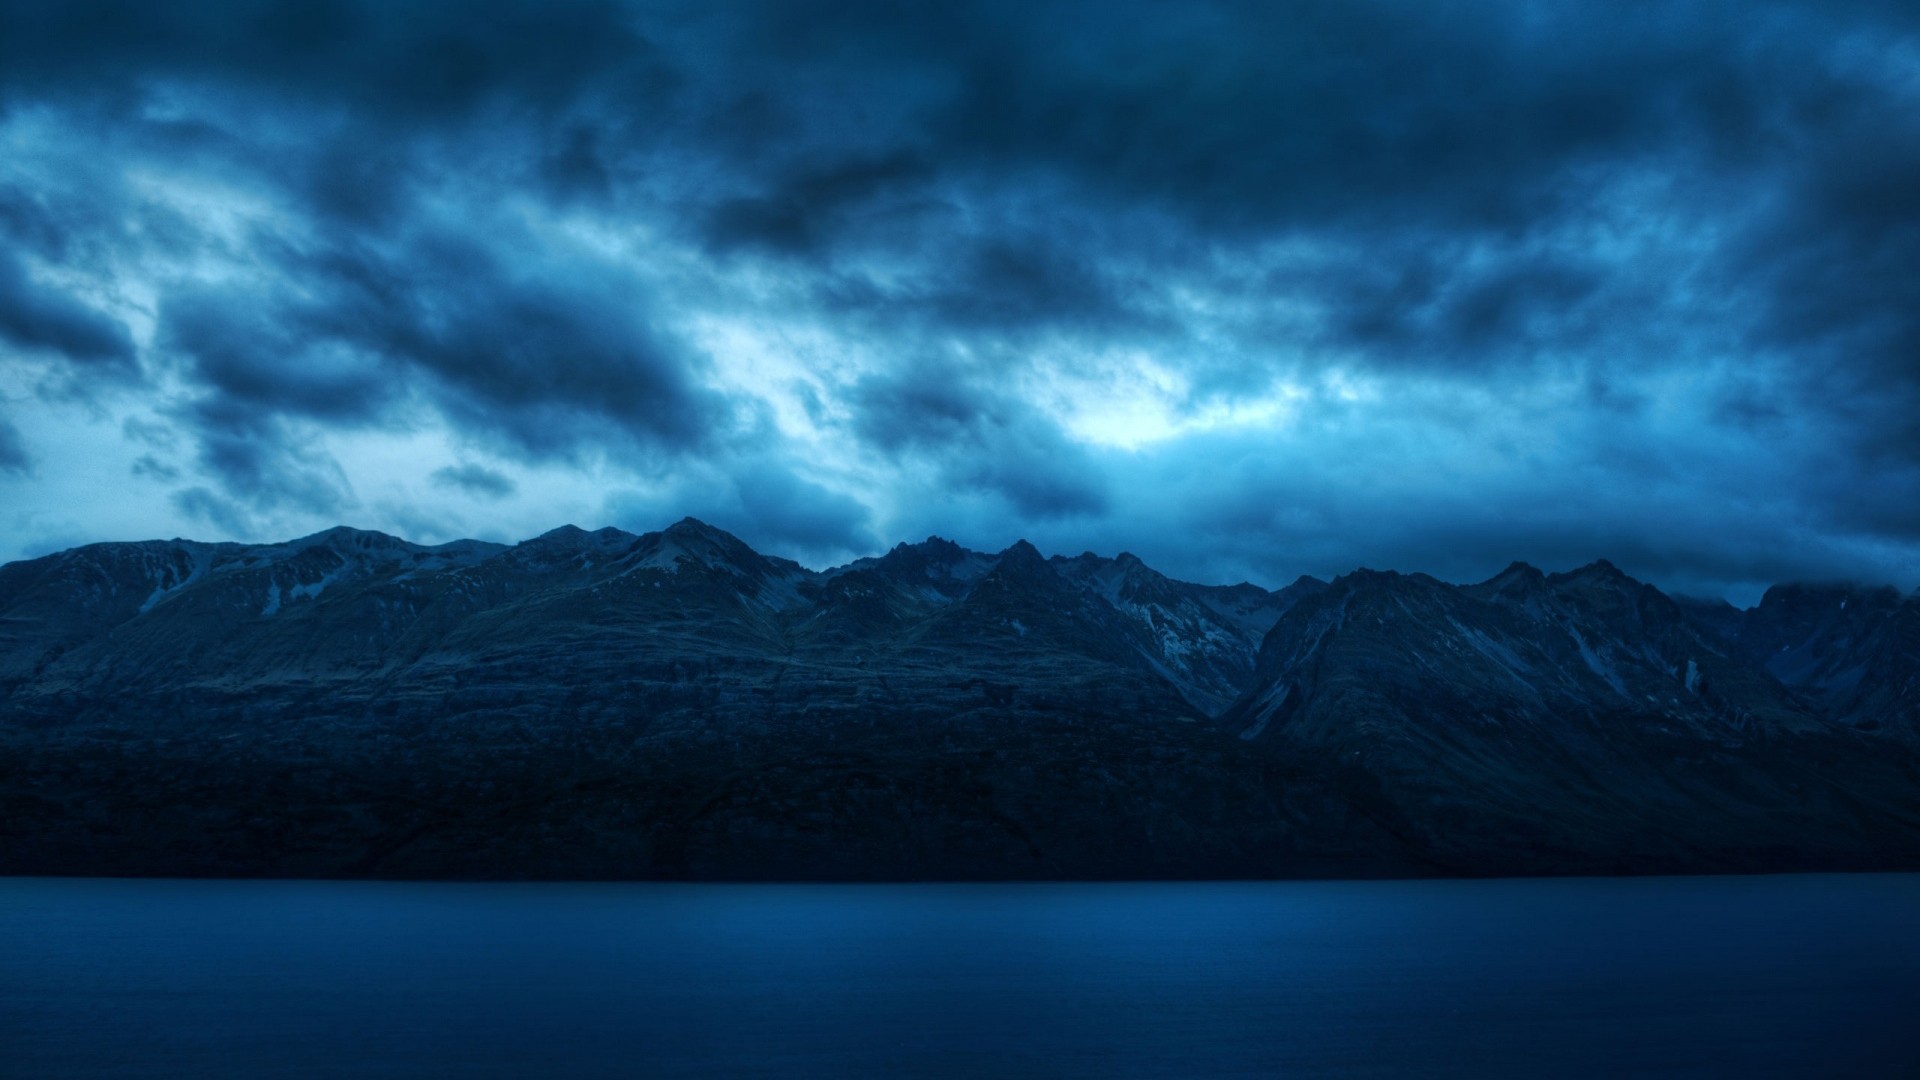 General 1920x1080 landscape nature dark mountains sky clouds water blue